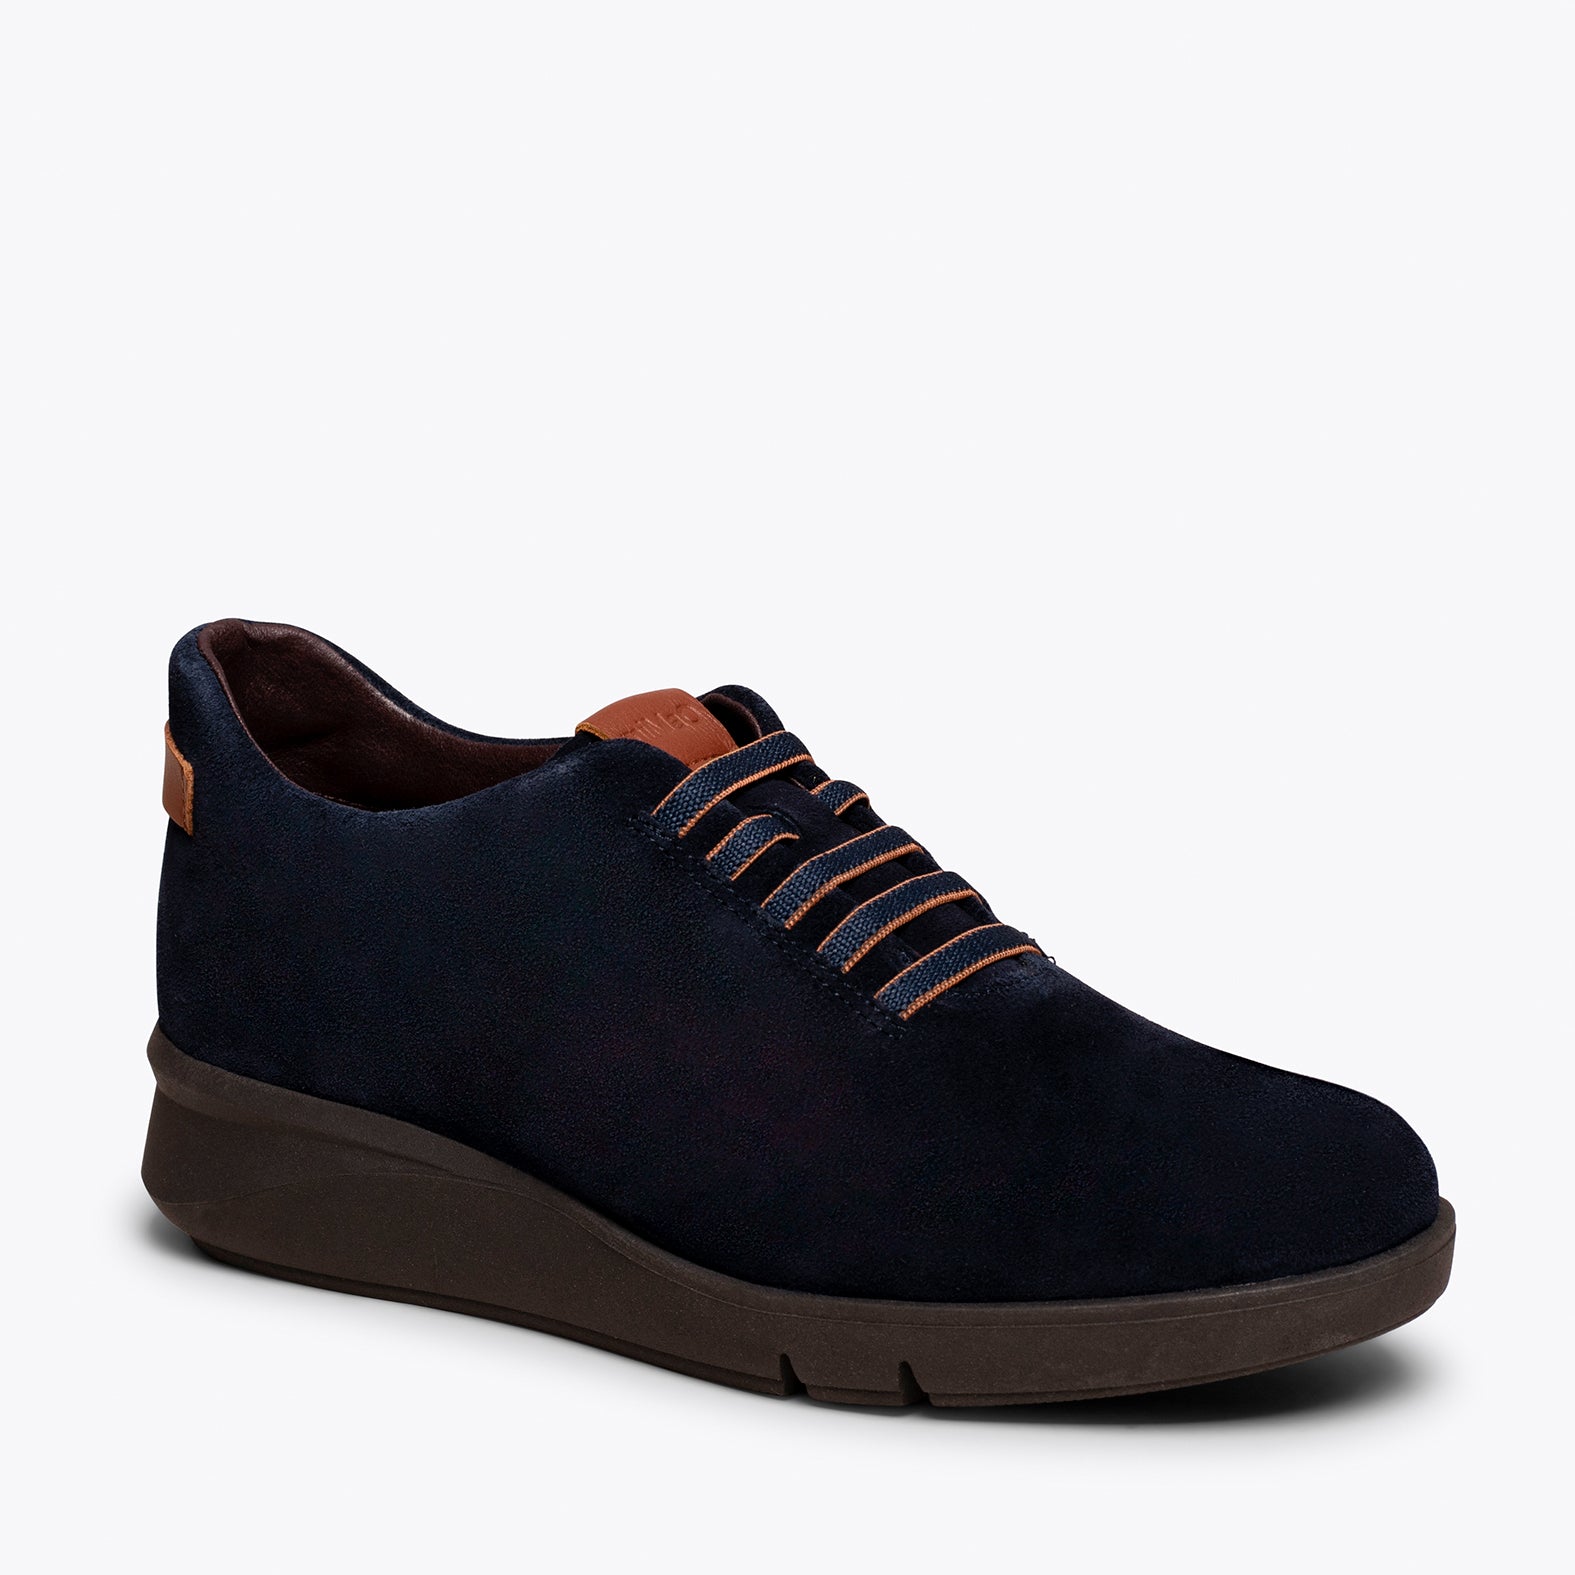 FLY – NAVY casual sneaker with elastic laces